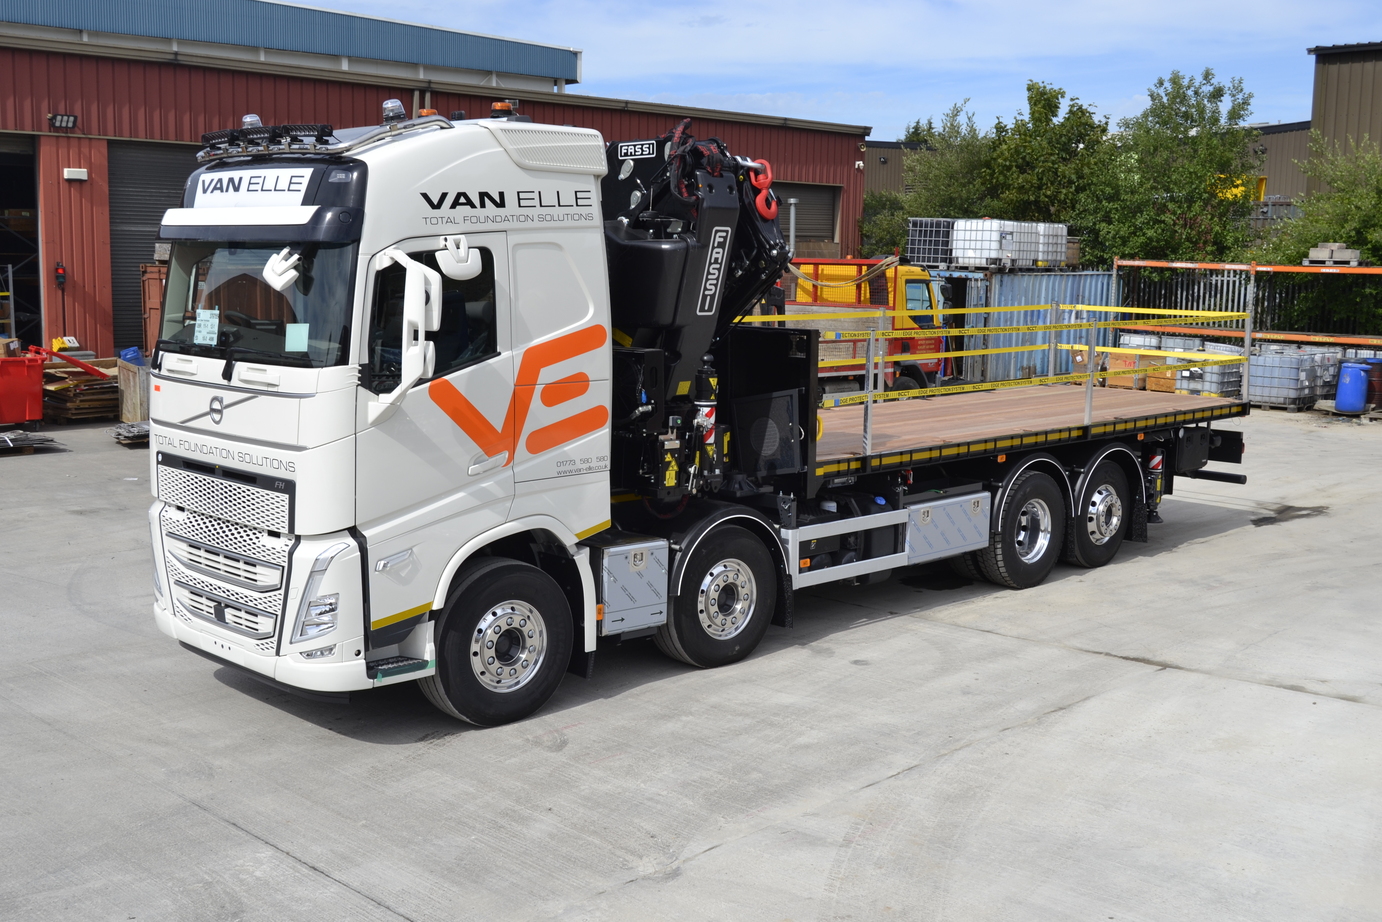 ANOTHER NEW FASSI FOR VAN ELLE